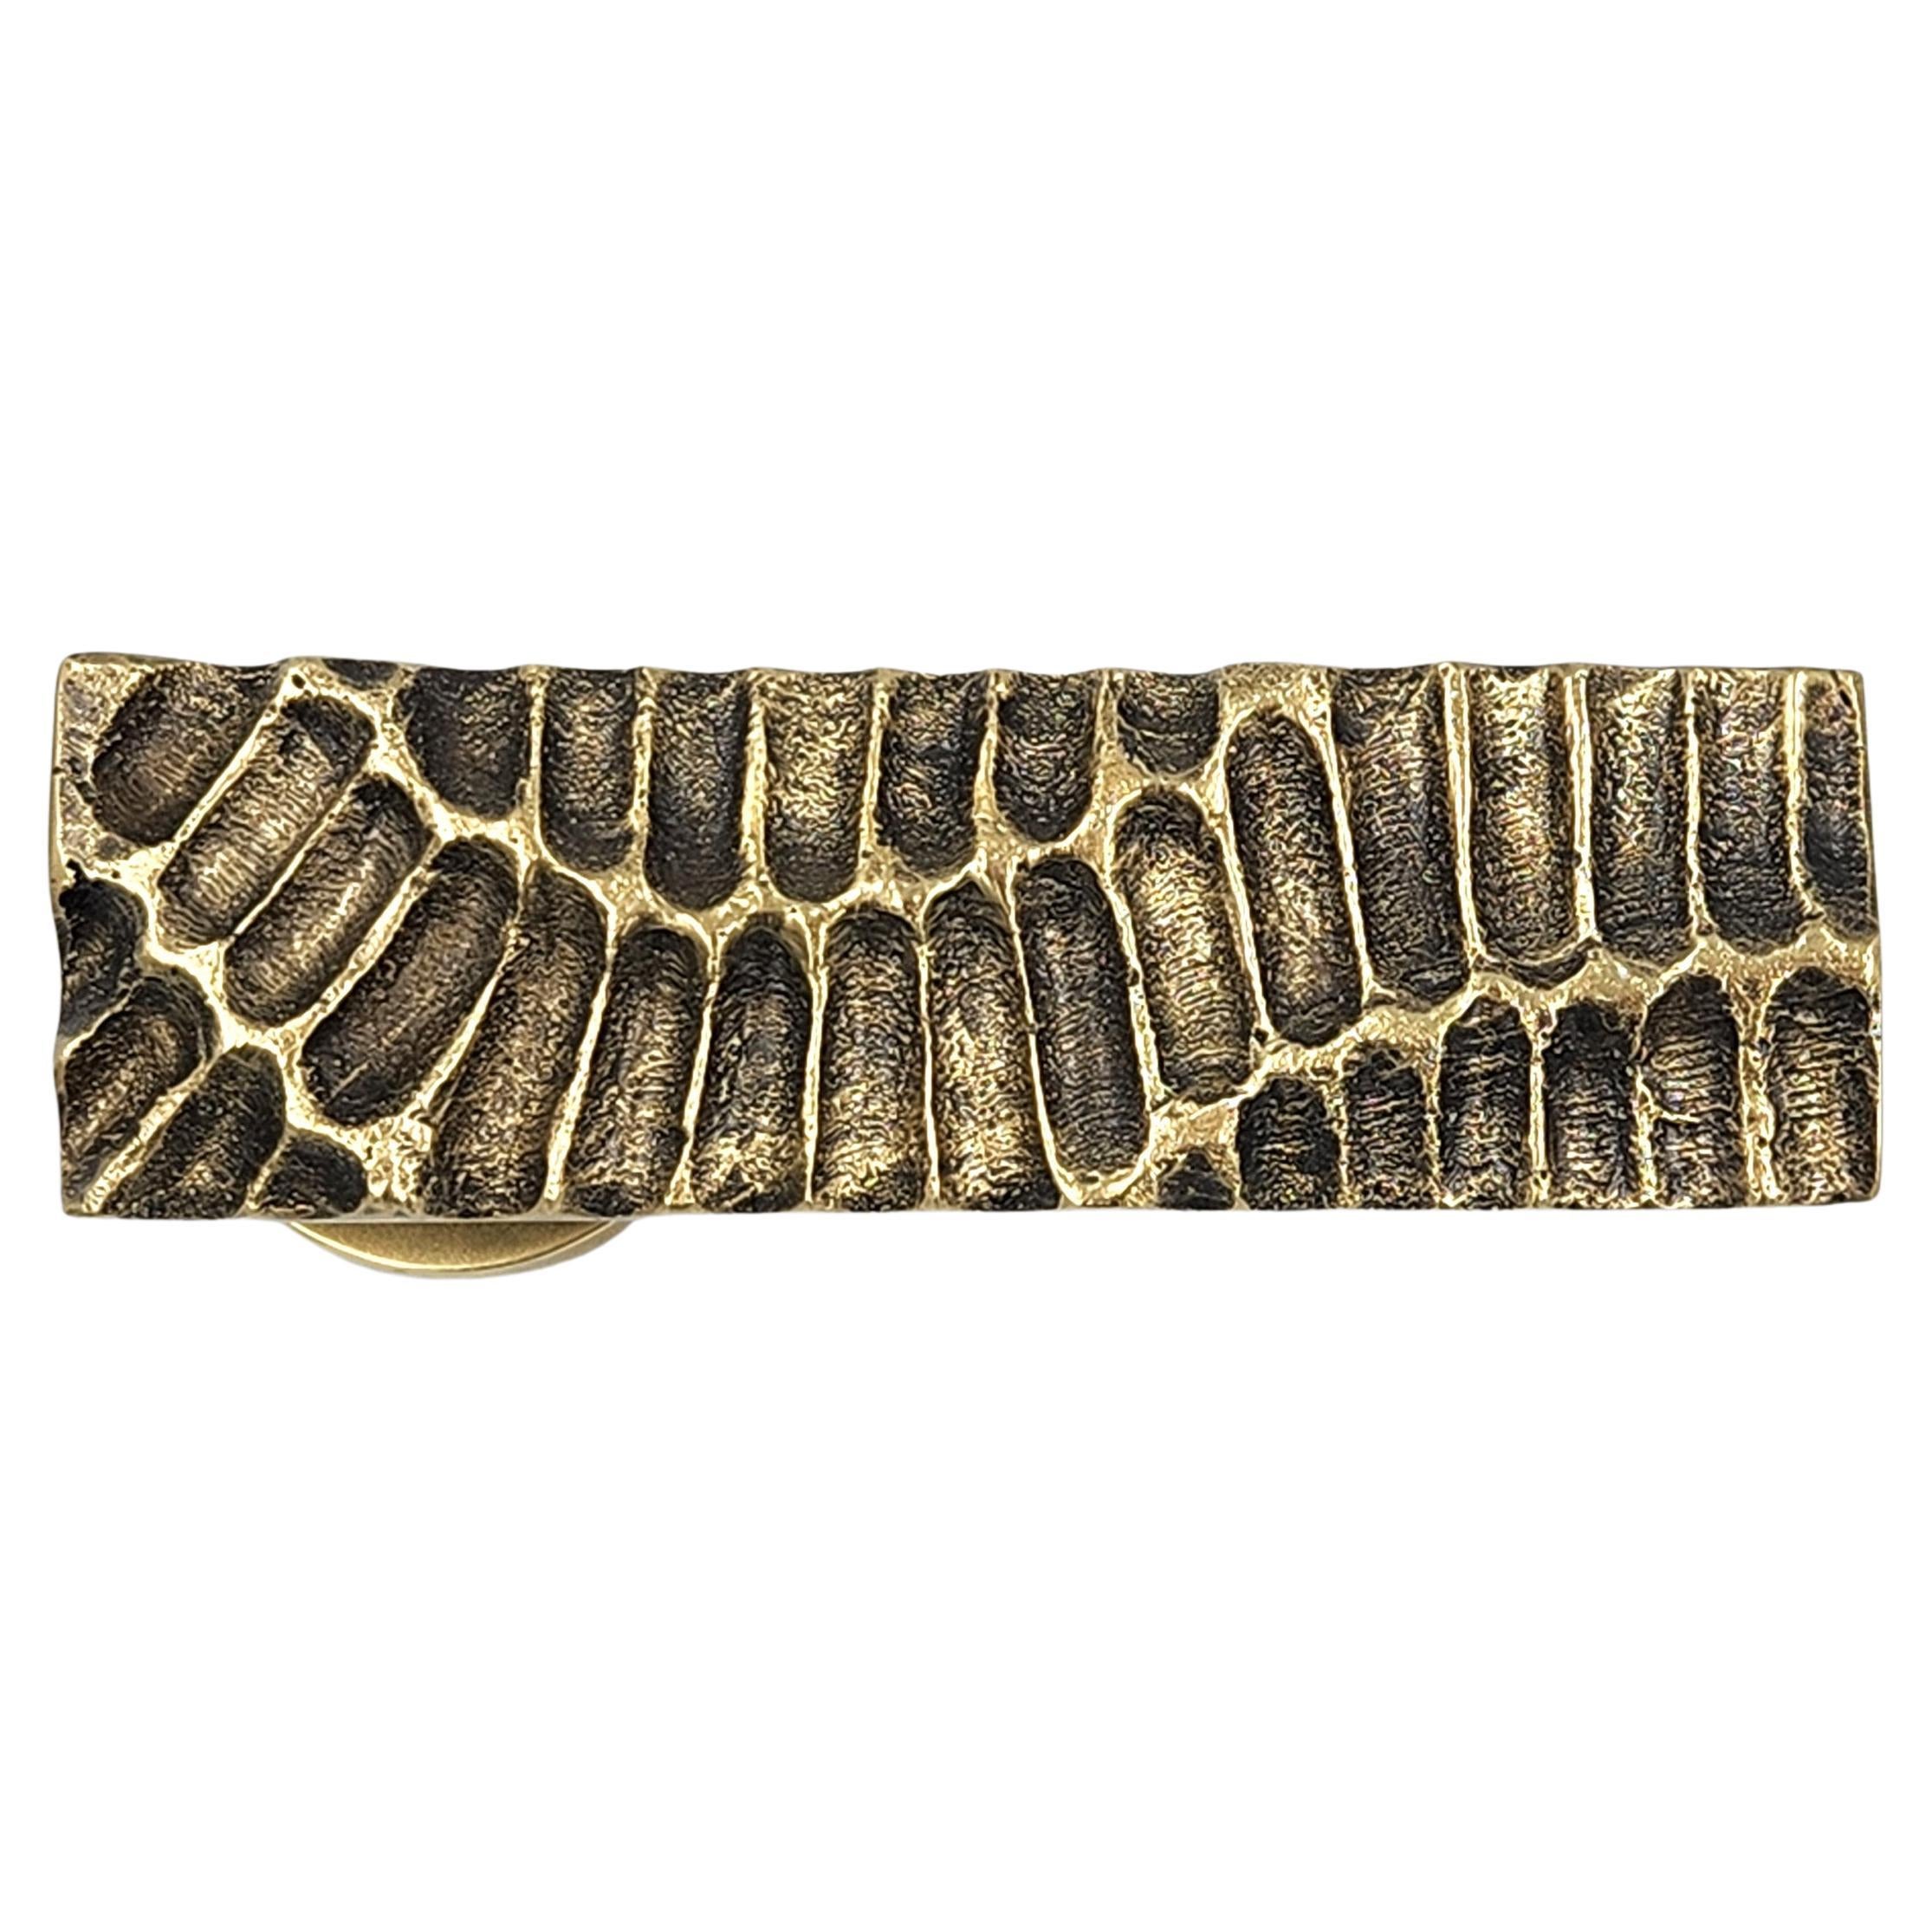 Brass Foundry Door Handle Earth Print Inspiration with Textured Effects